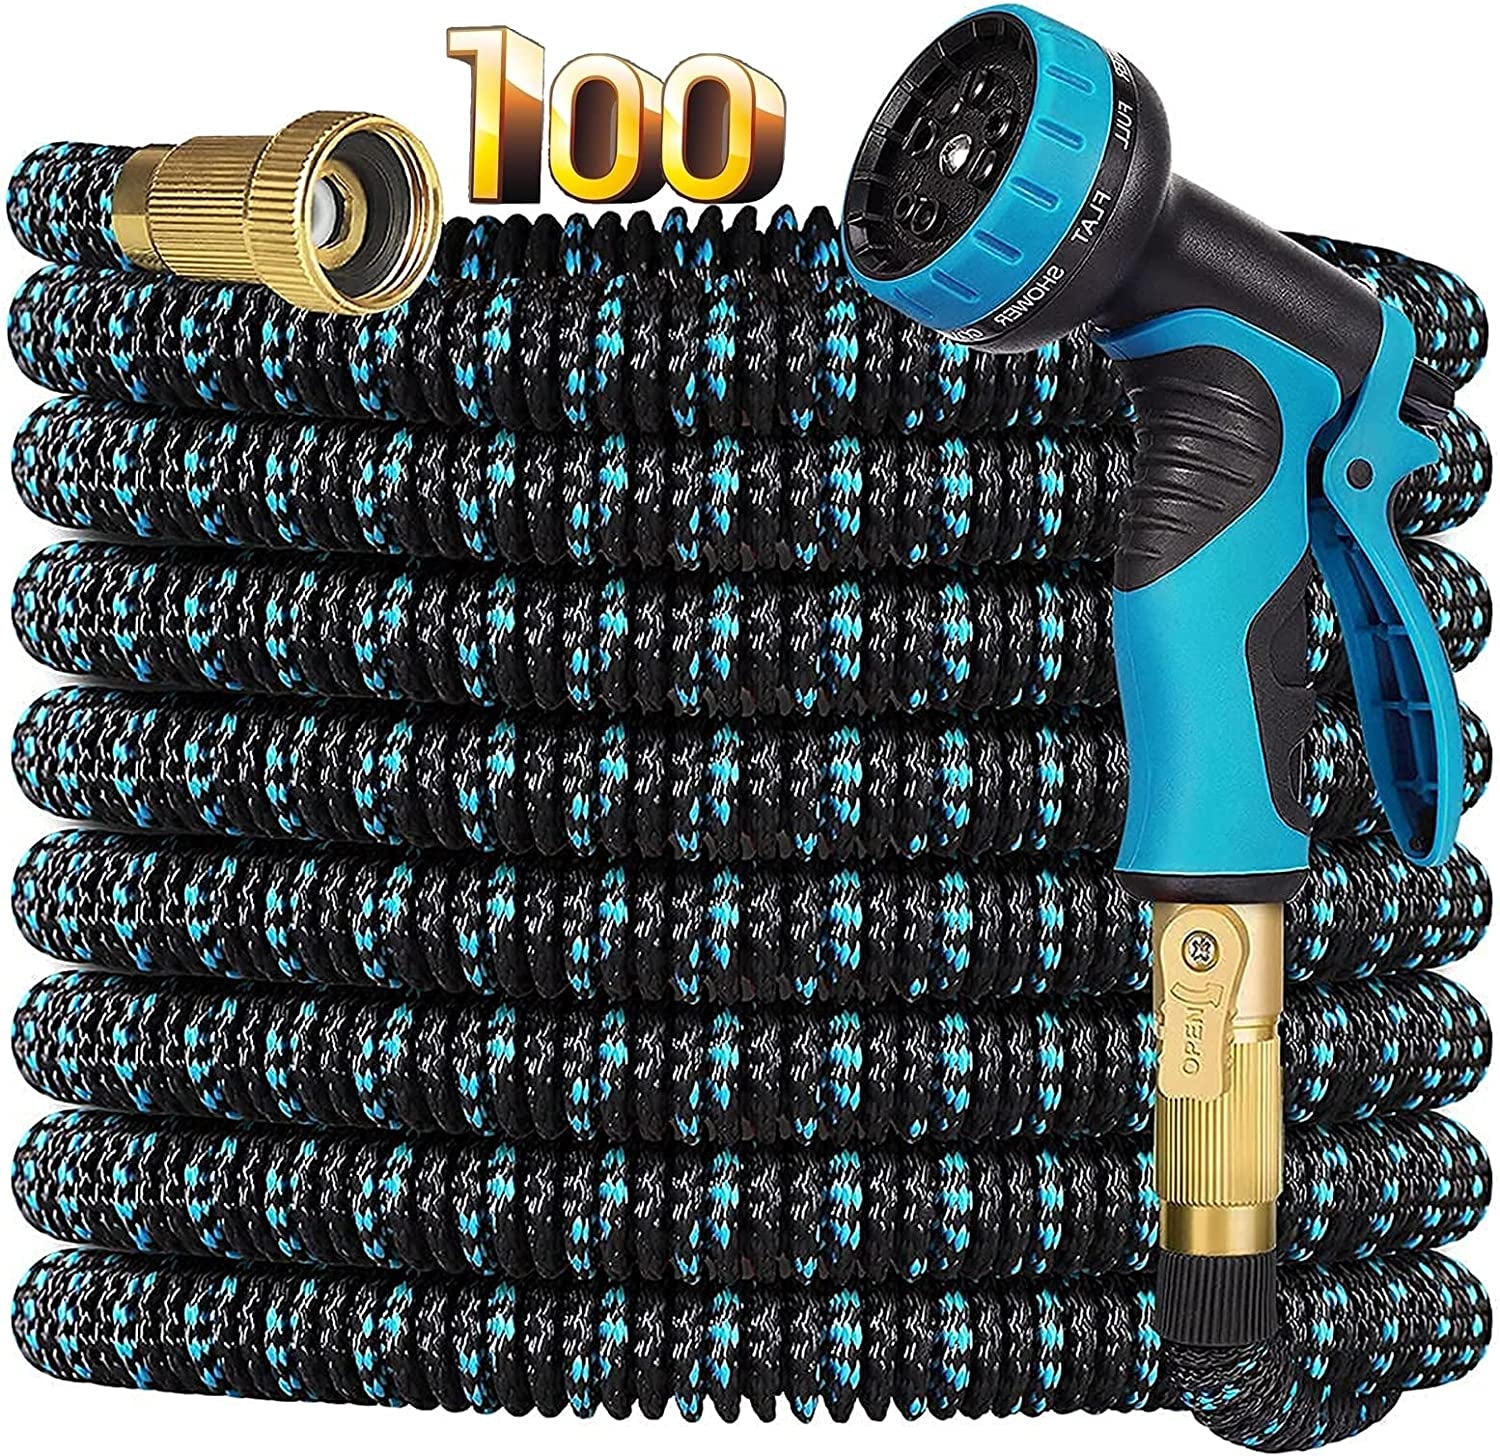 Wuciray, Garden Hose Expandable, Wuciray 50Ft(15M) Retractable Water Hose with 10 Function Spray Gun, 3/4" Solid Extra-Strong Solid Brass Connectors, High Pressure Garden Hoses Set with Durable 3-Layers Latex